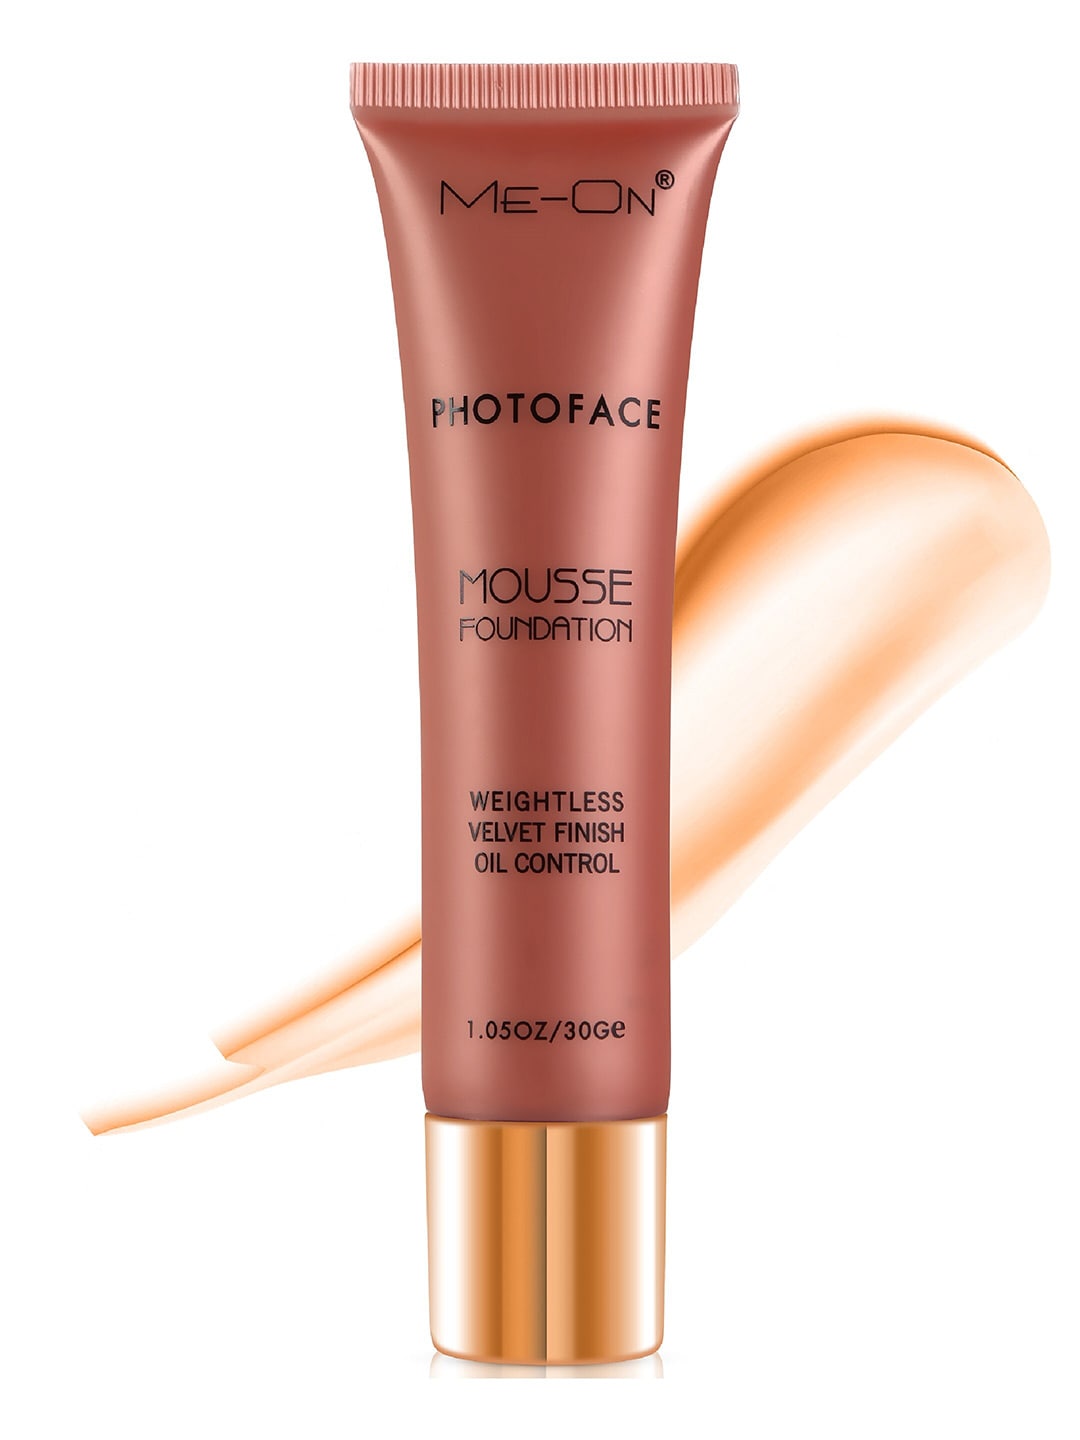 ME-ON Photoface Mousse Foundation (Shade 23) Price in India